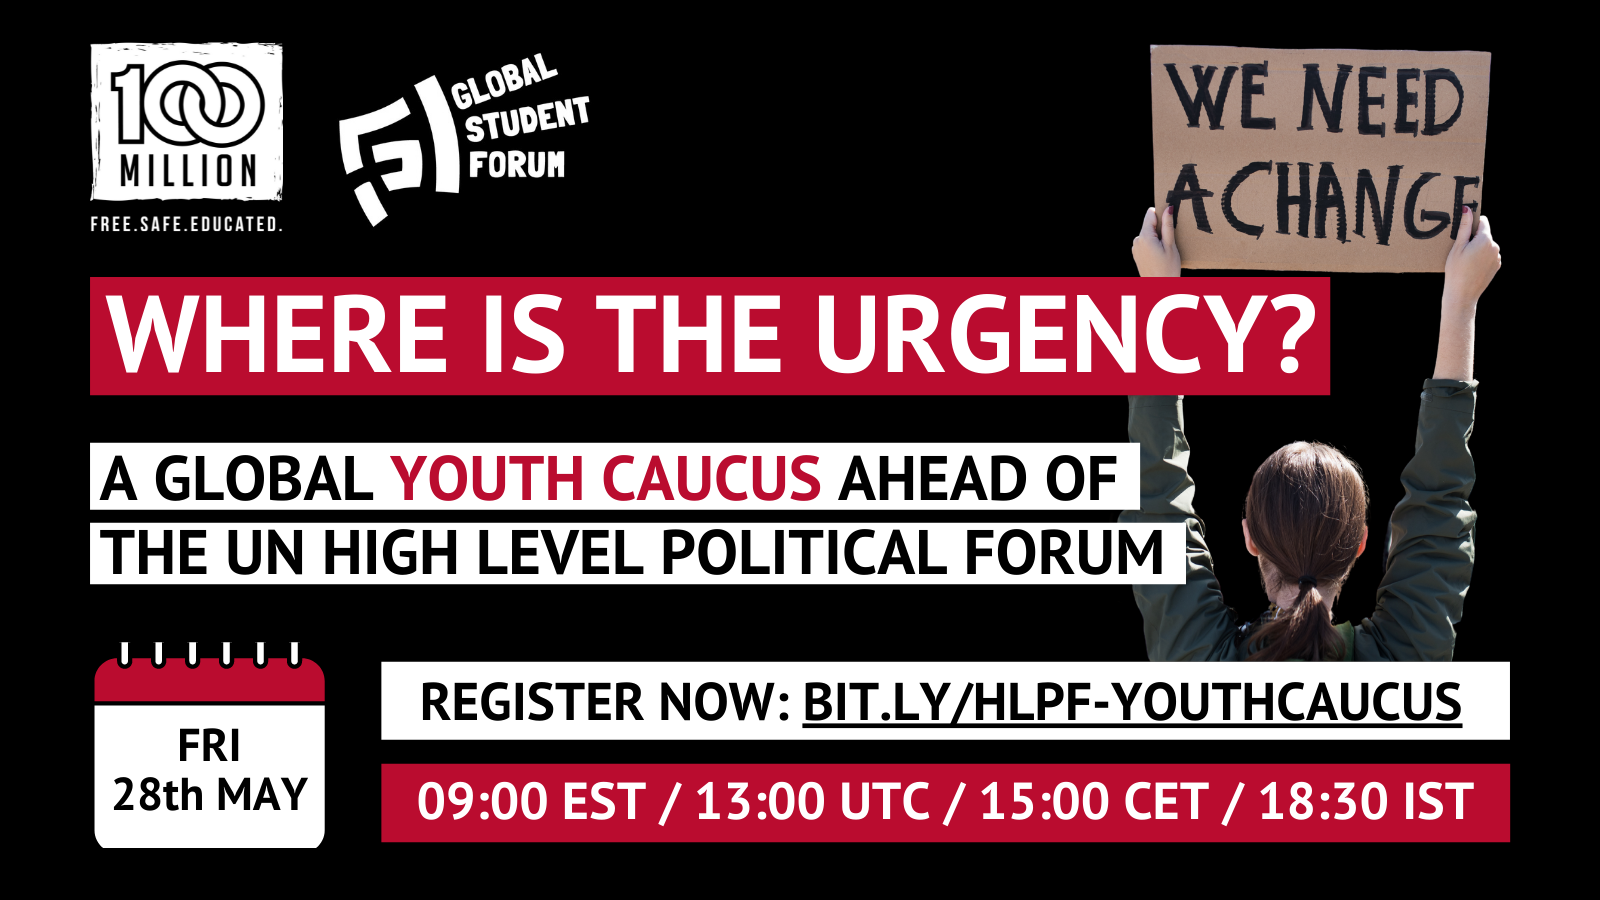 Where is the urgency? A global youth caucus ahead of the High Level Political Forum